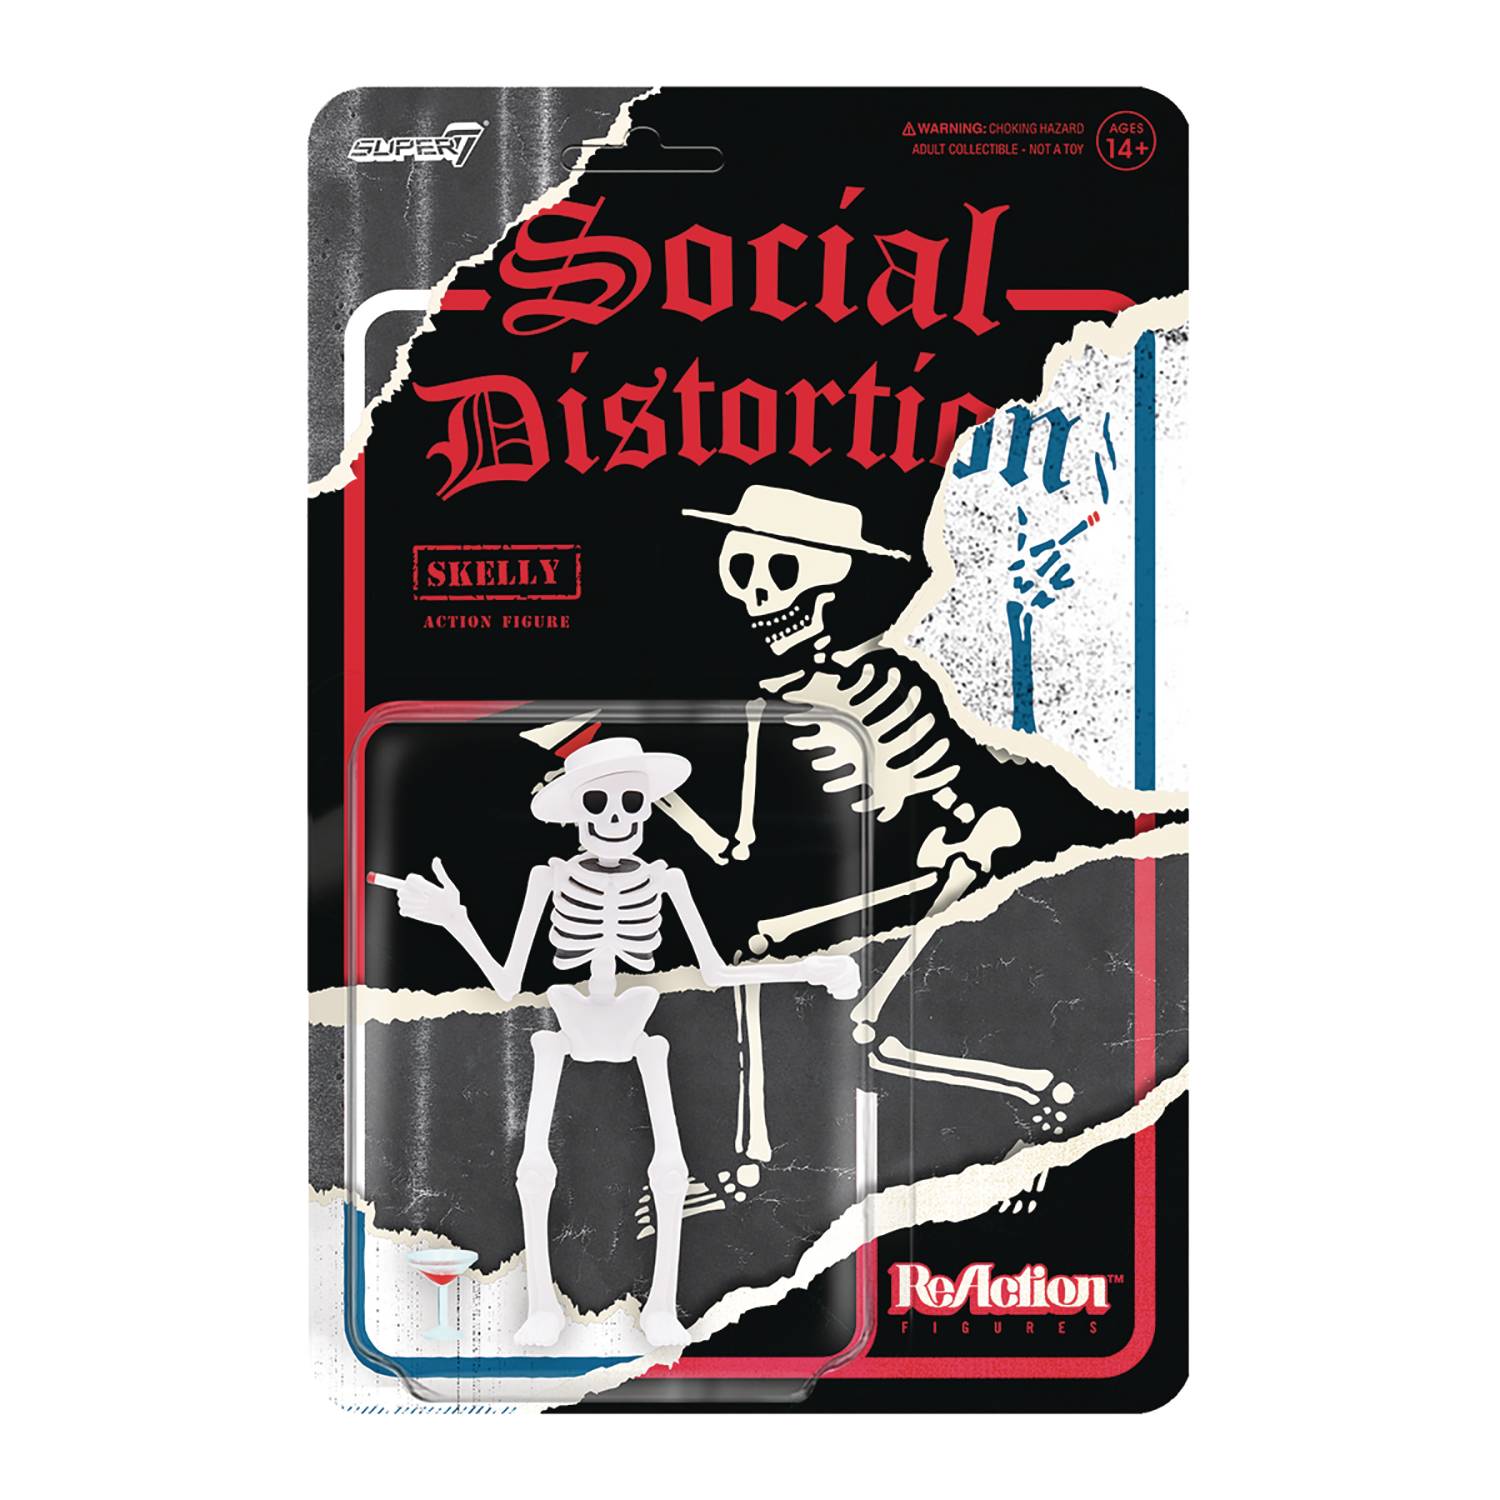 SOCIAL DISTROTION W1 SKELLY REACTION FIG